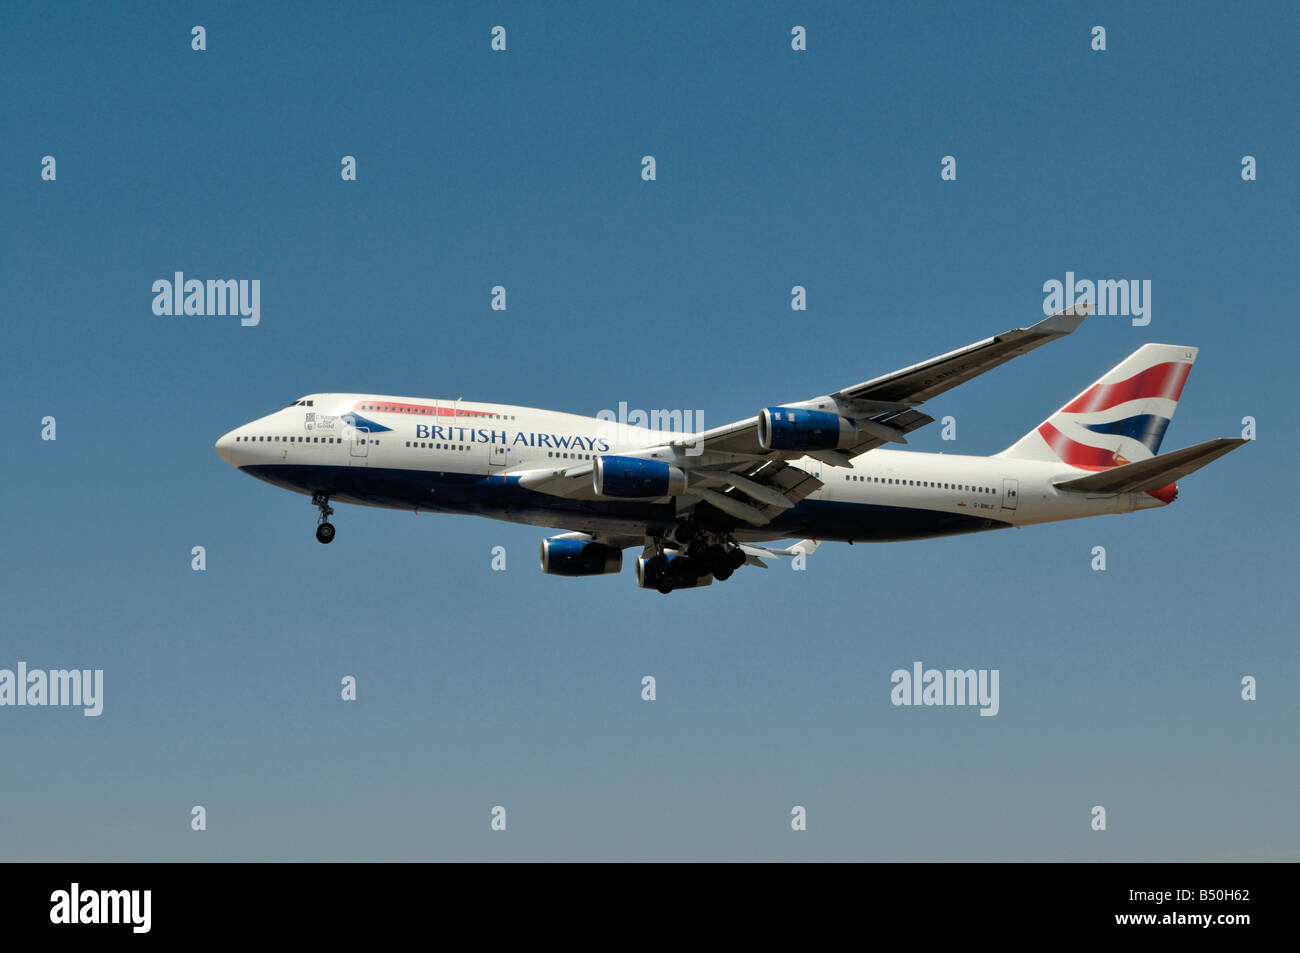 British Airways operated Boeing 747-400 about to land at LAX Stock Photo